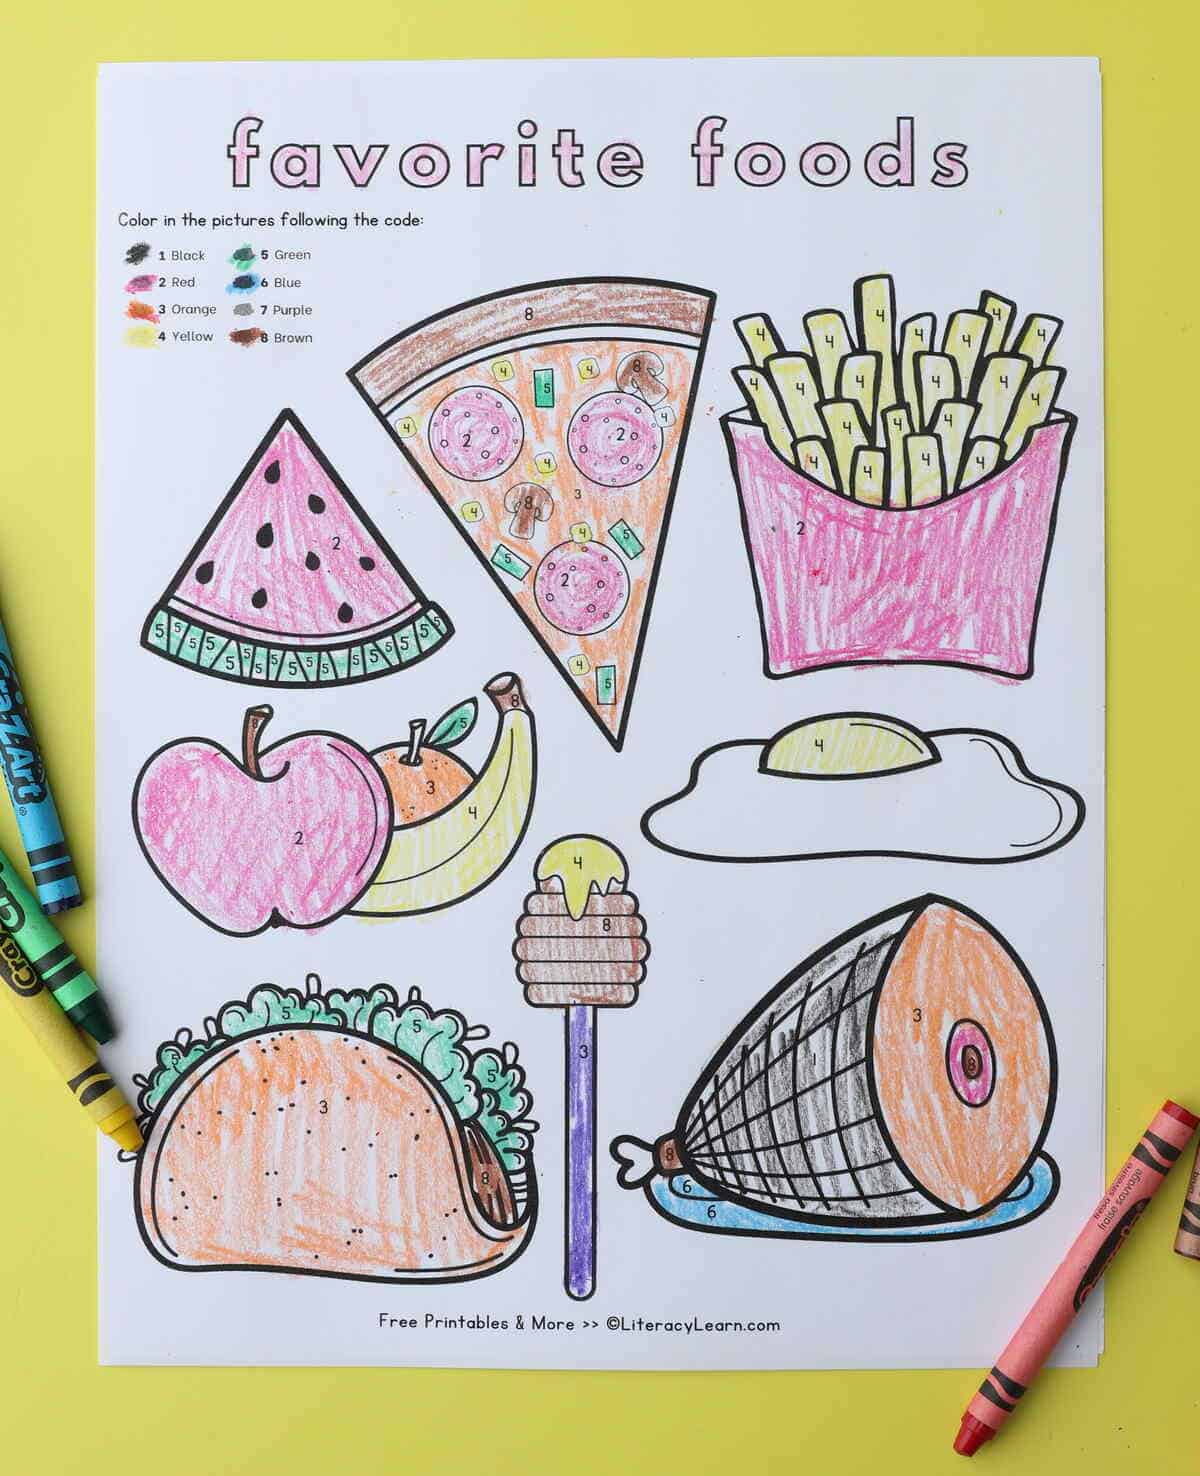 A printed favorite foods category coloring page with pizza, fries, egg, meat, fruit, and a taco.